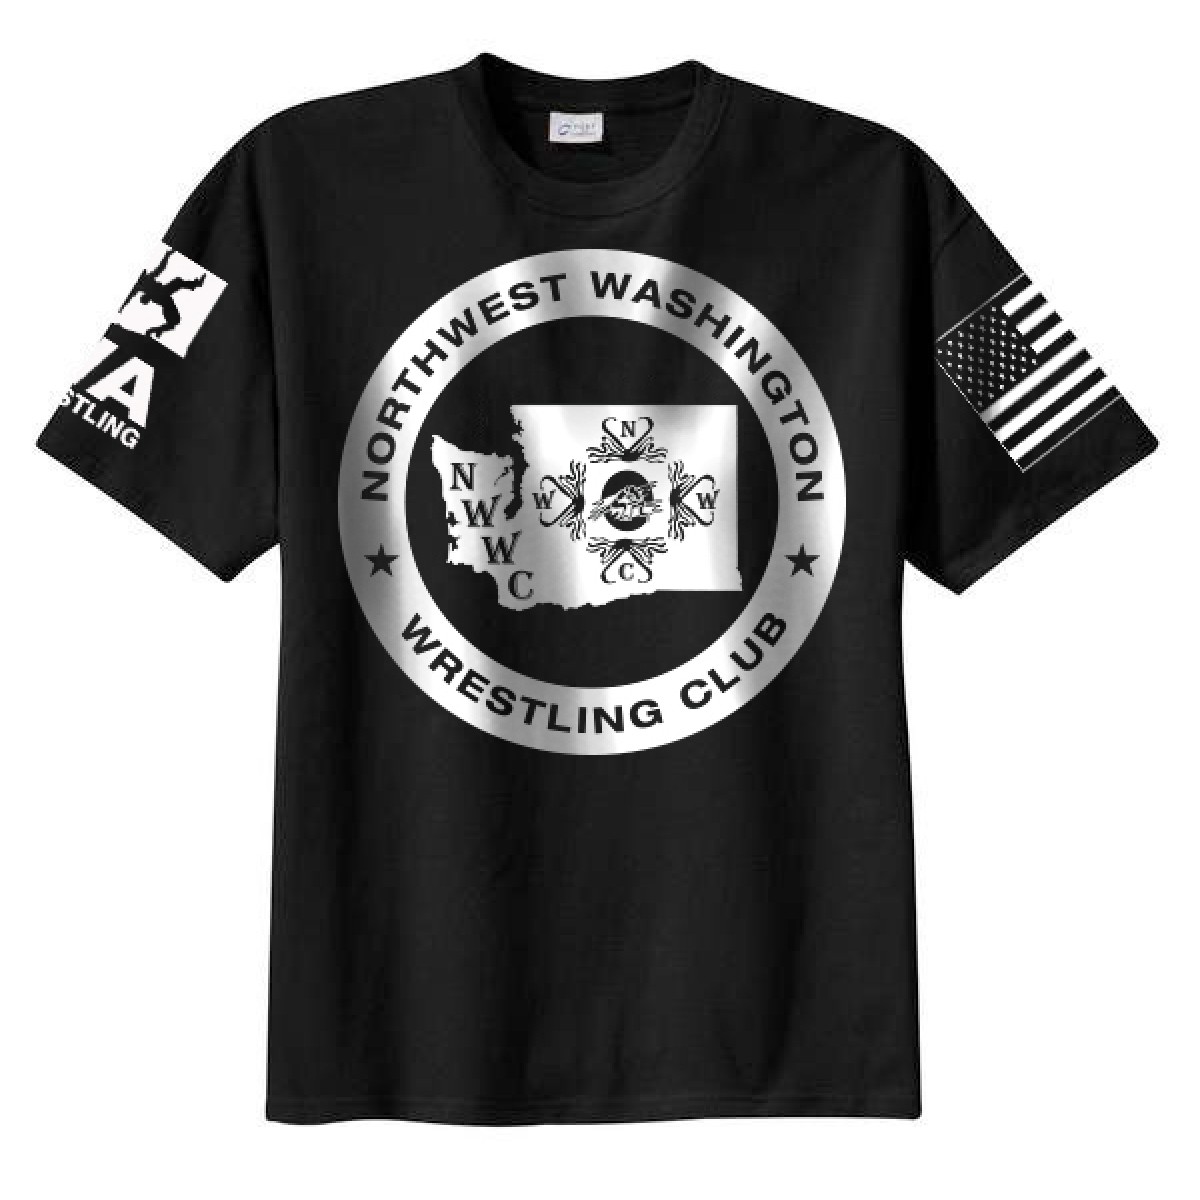 NWWC Black T-shirt With White Logo On The Front-Black-XL